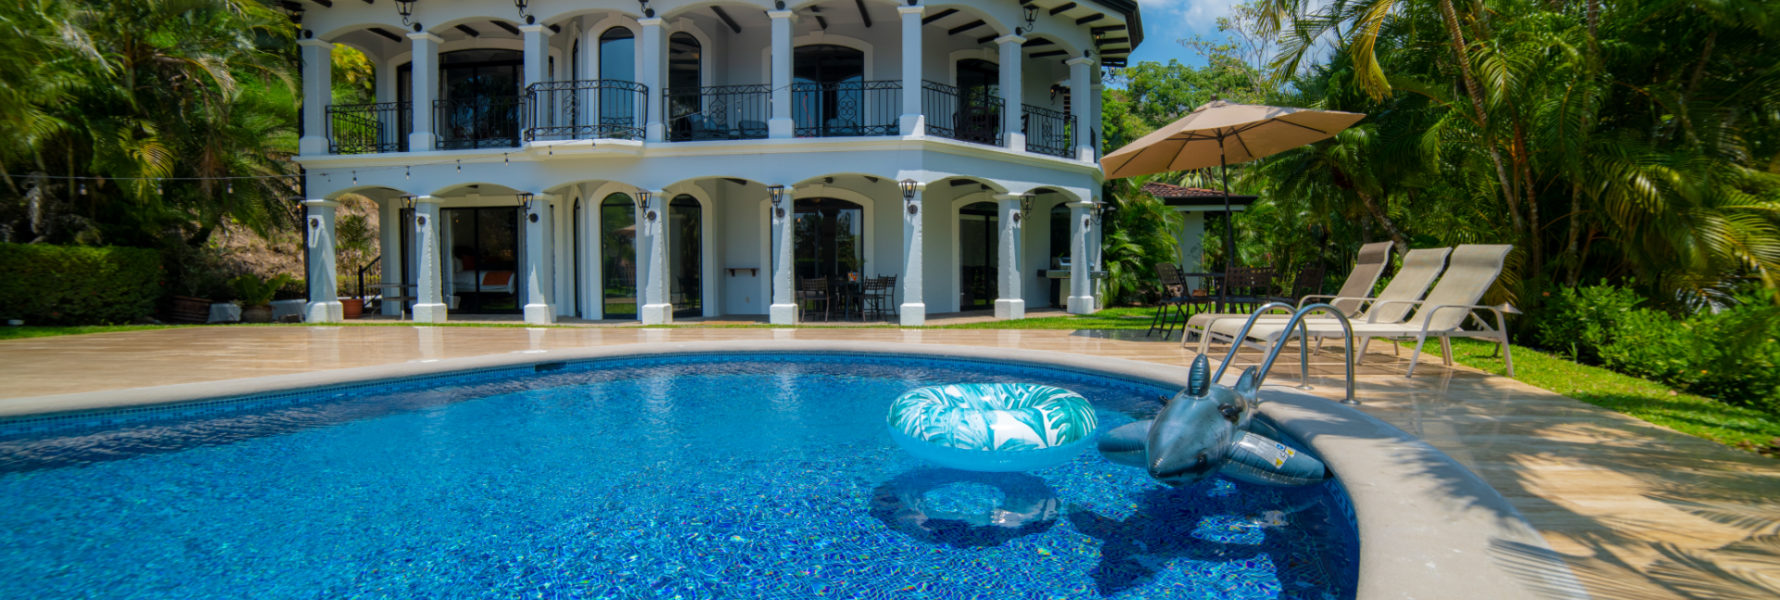 Enjoy the private large pool area with your loved ones.